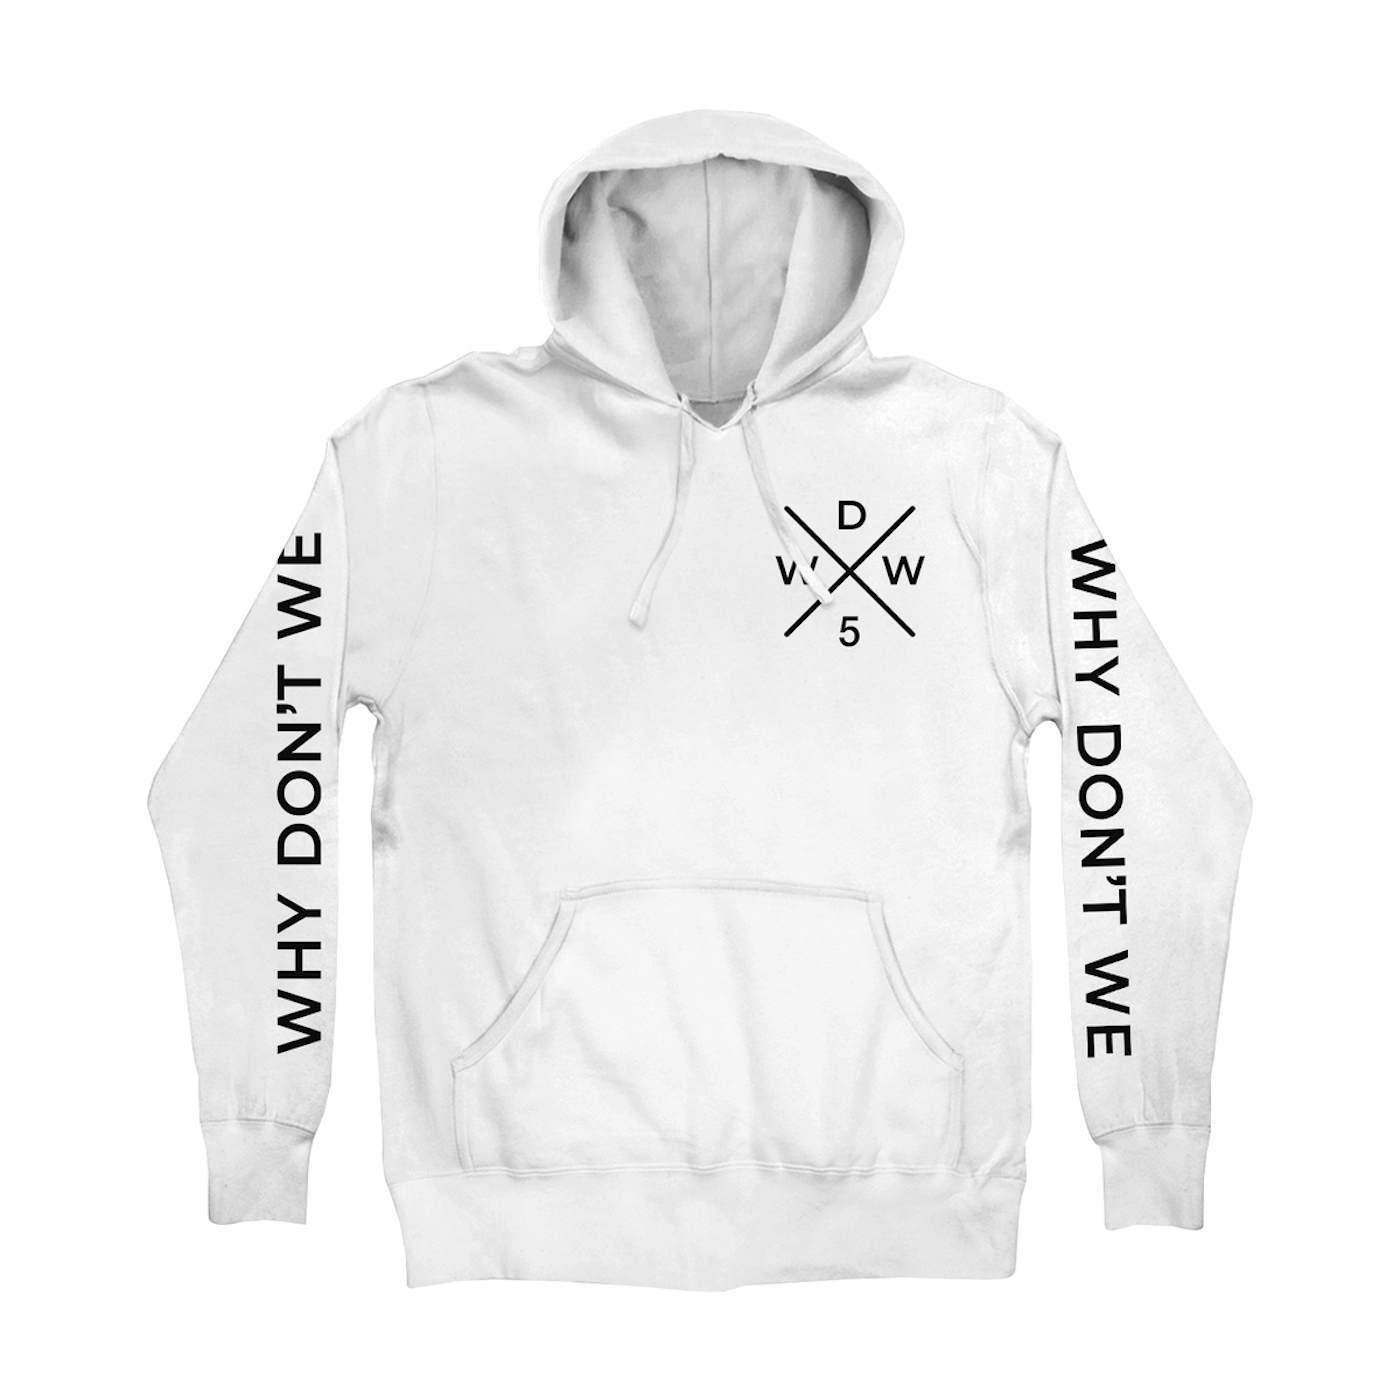 Why Don't We Hoodie | WDW5 Criss Cross Iconic Why Don’t We Hoodie